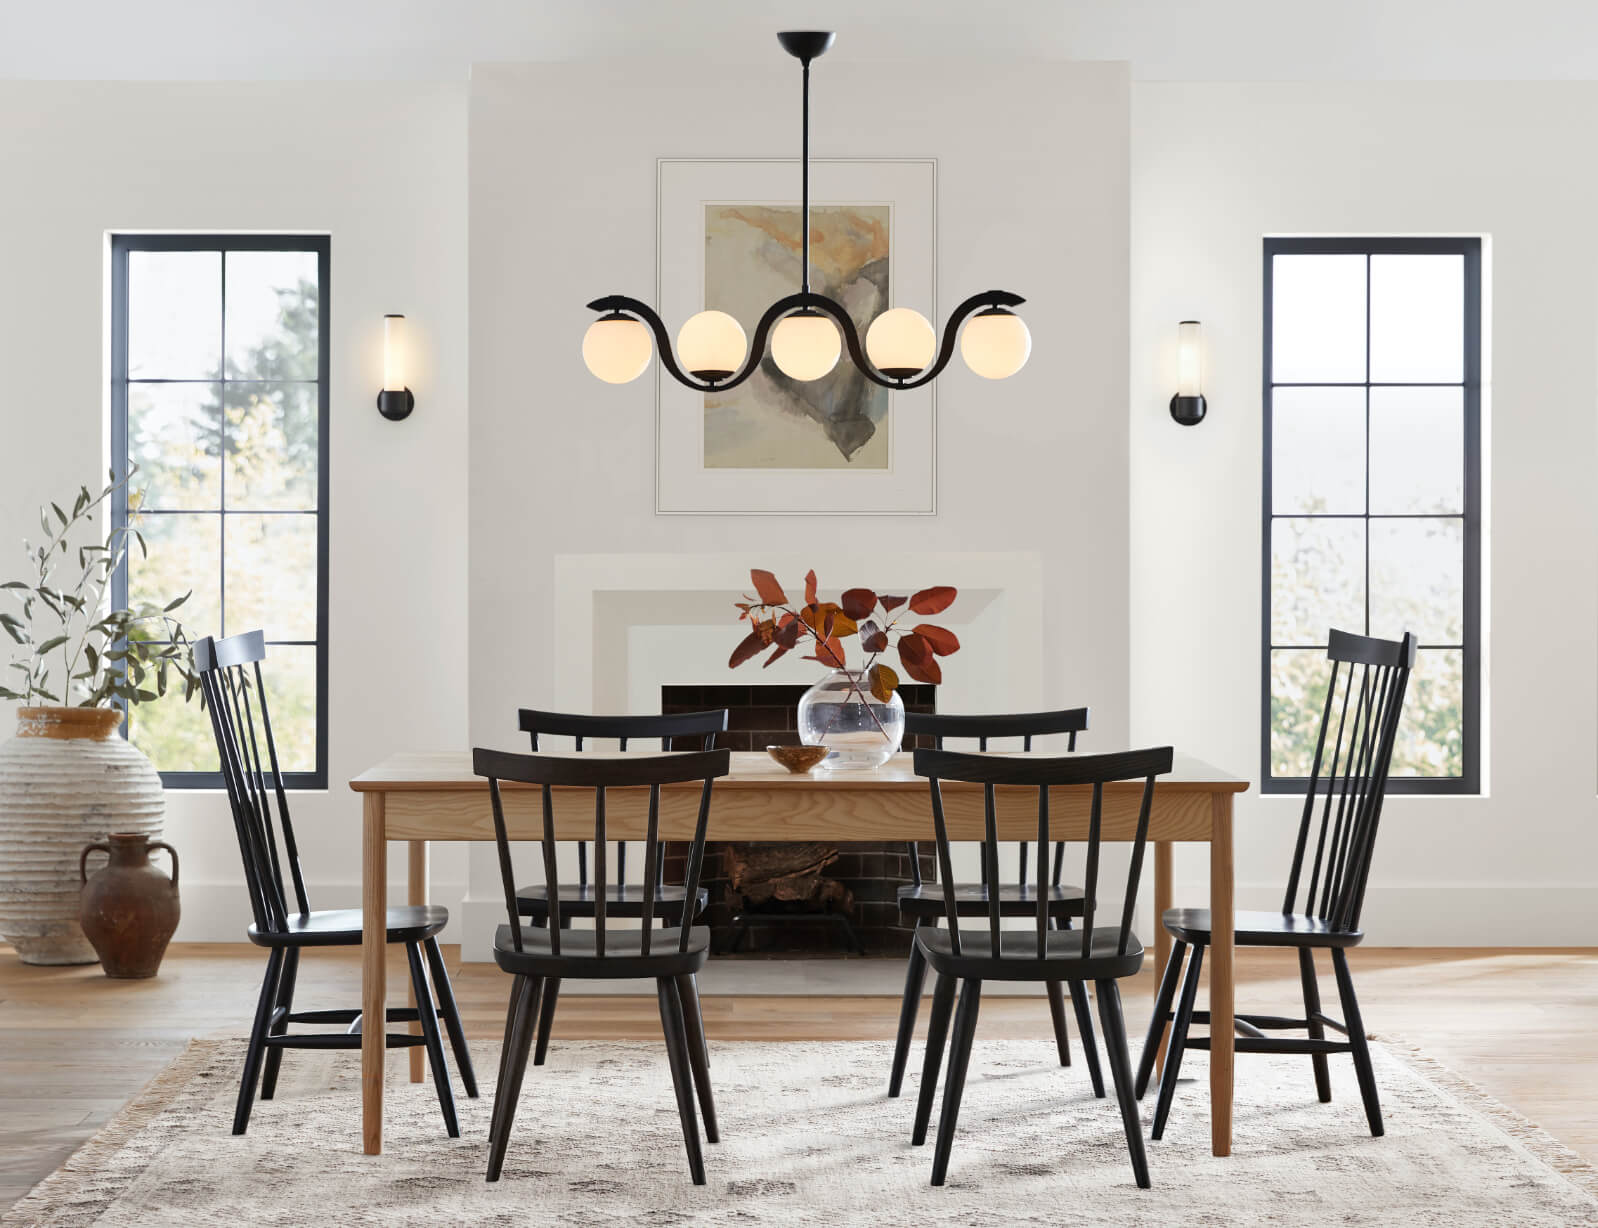 How To Choose Dining Room Lighting, Hanging Lighting Over Dining Table